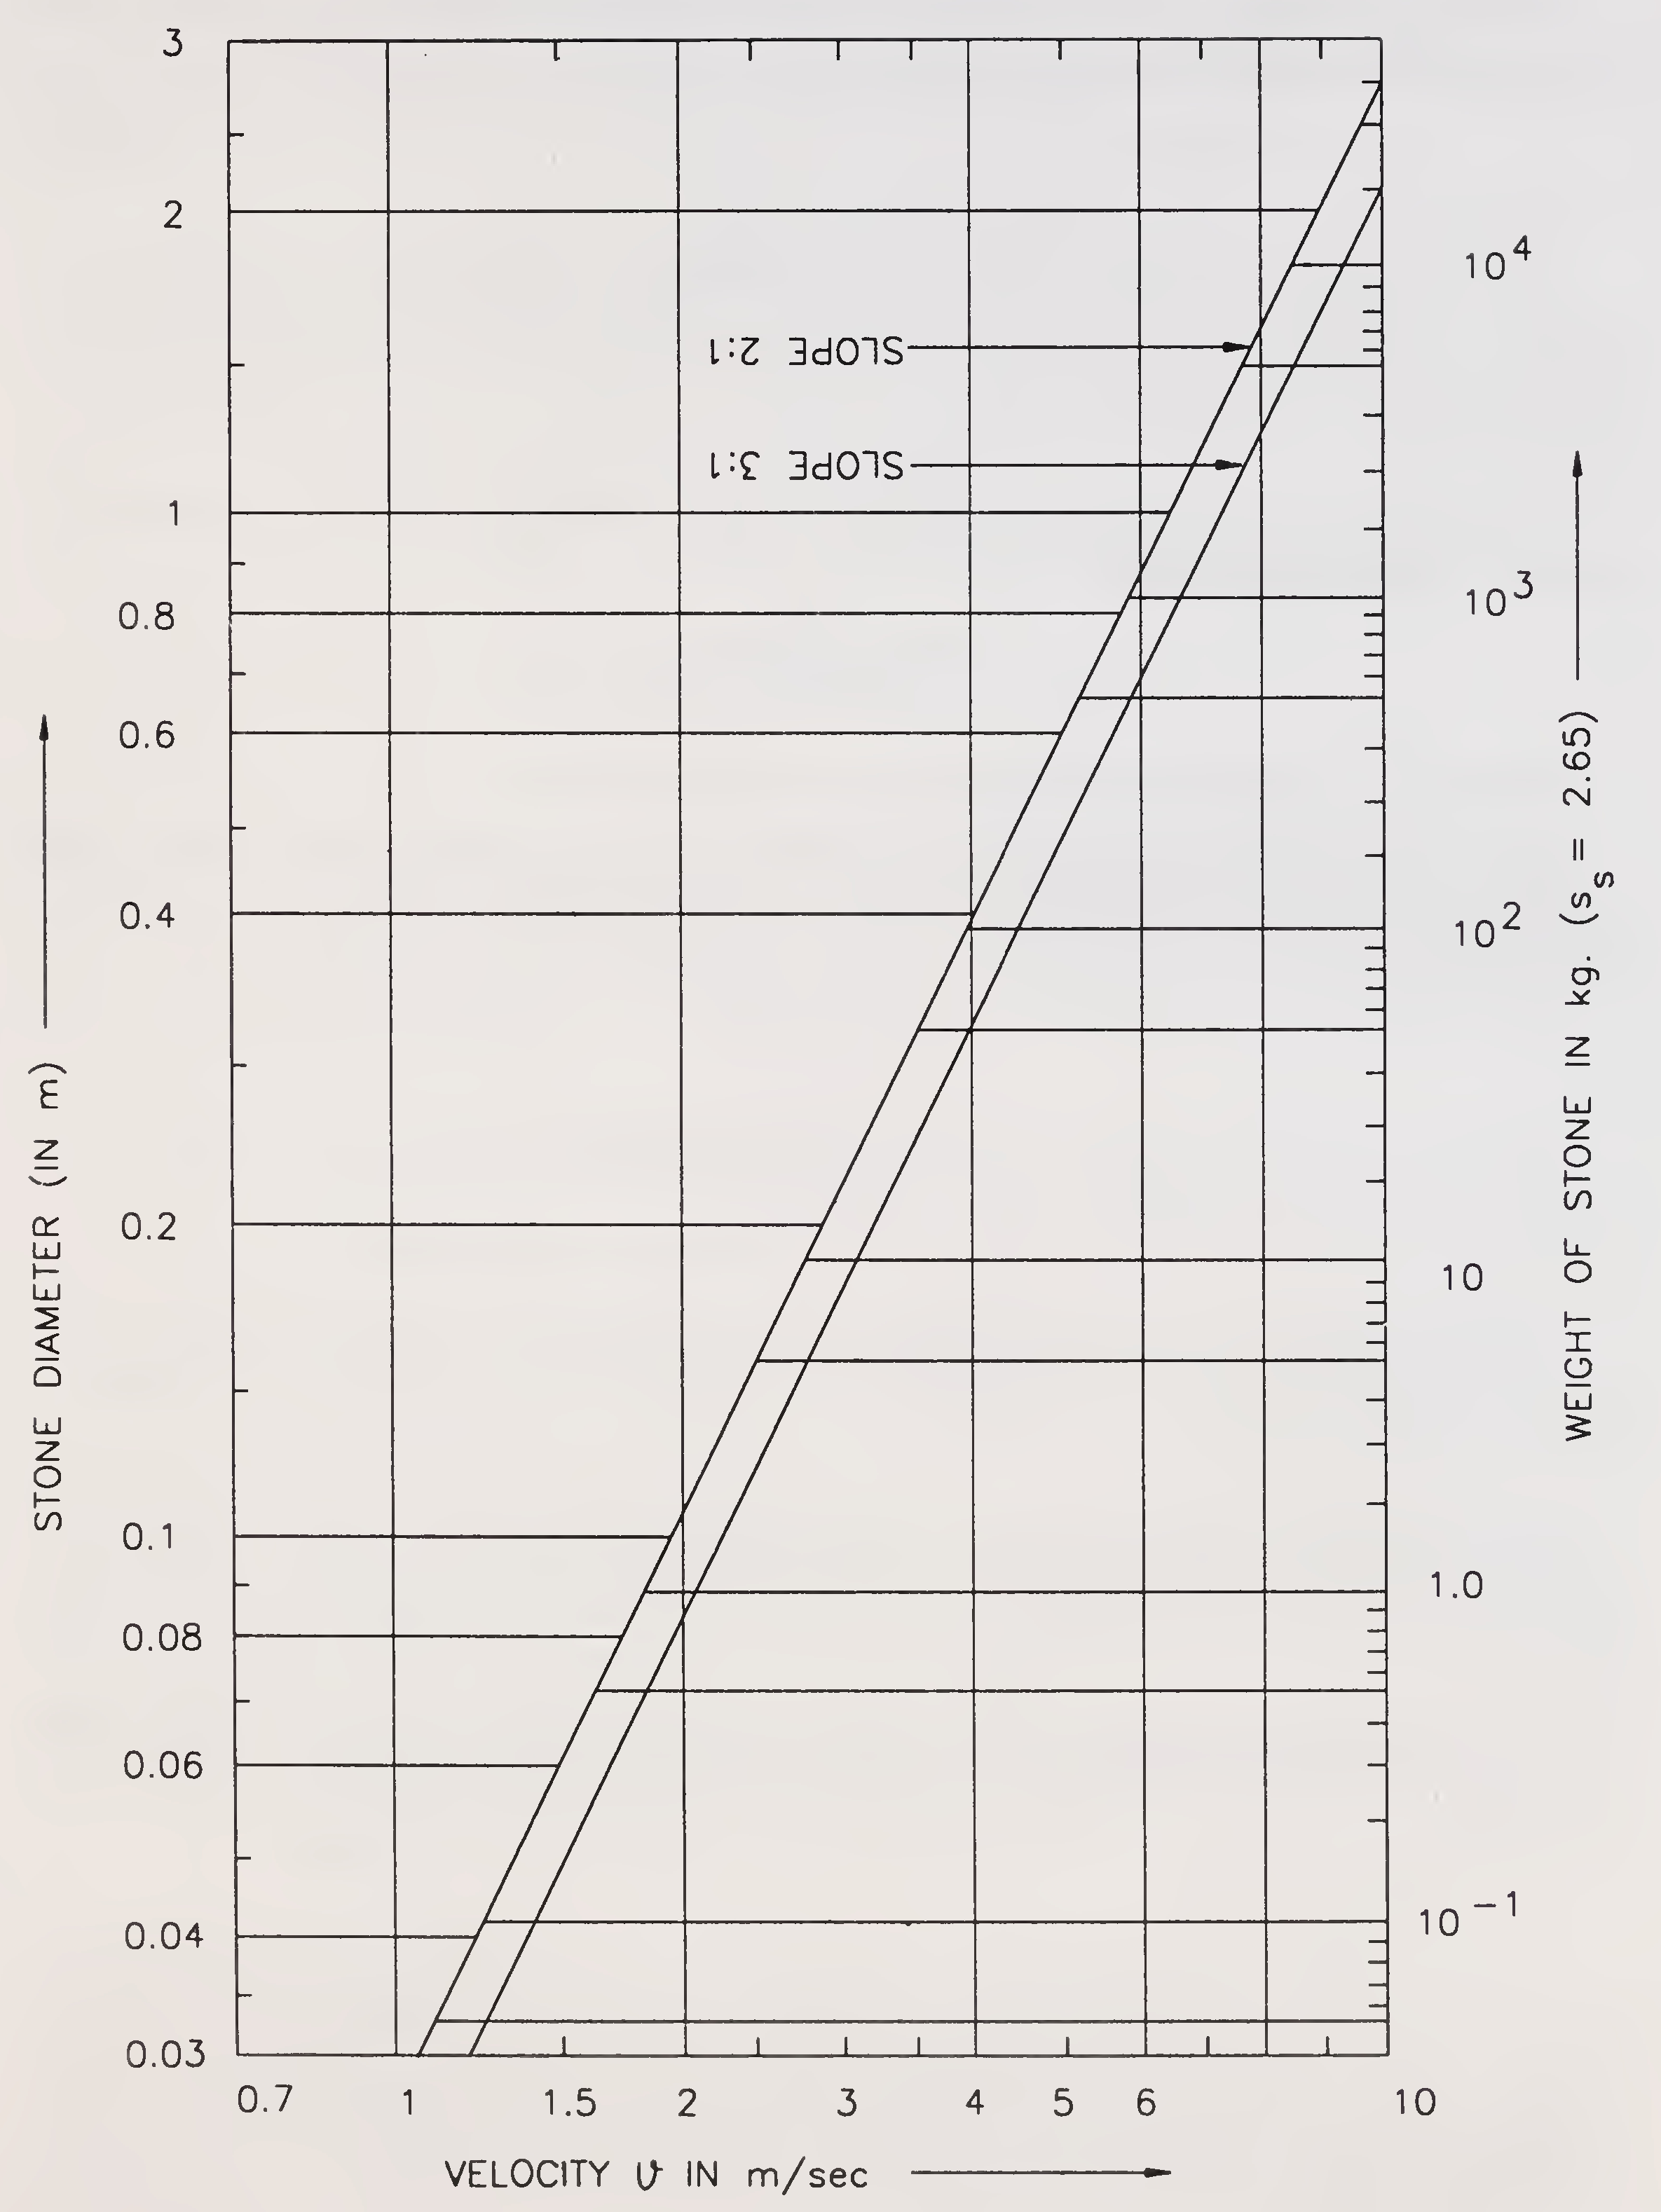 Fig. 5.6. Size of stone pitching v/s velocity (Para 5.3.5.1)